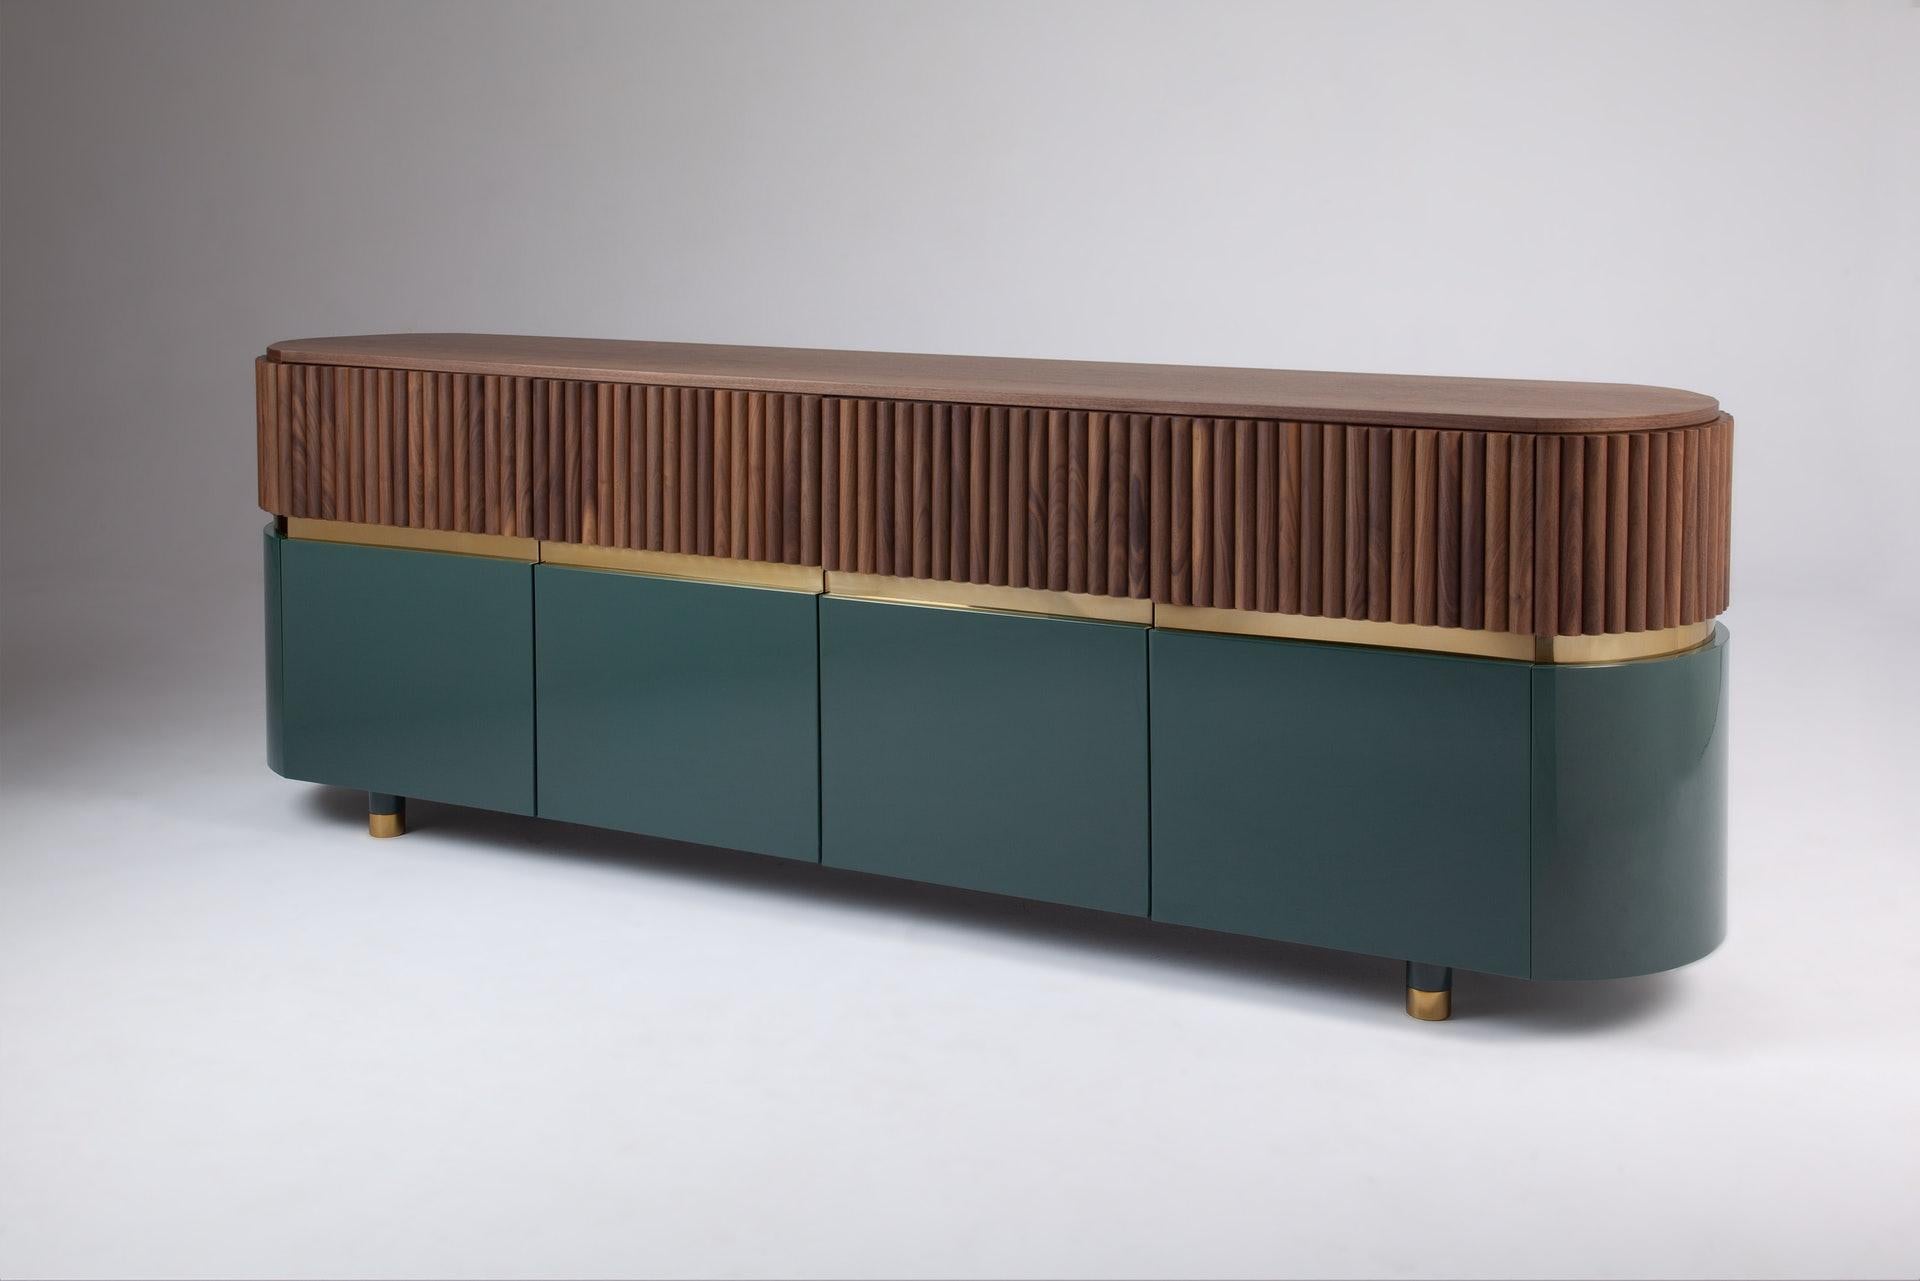 Berlin Contemporary sideboard by Dooq
Dimensions: W 250 x D 50 x H 78 cm
Materials: MDF, Marble, Natural Walnut Veneer, Stainless Steel Plated Polished Copper, Feet: Stainless Steel Plated Polished Copper

Metropolis Sideboard was created